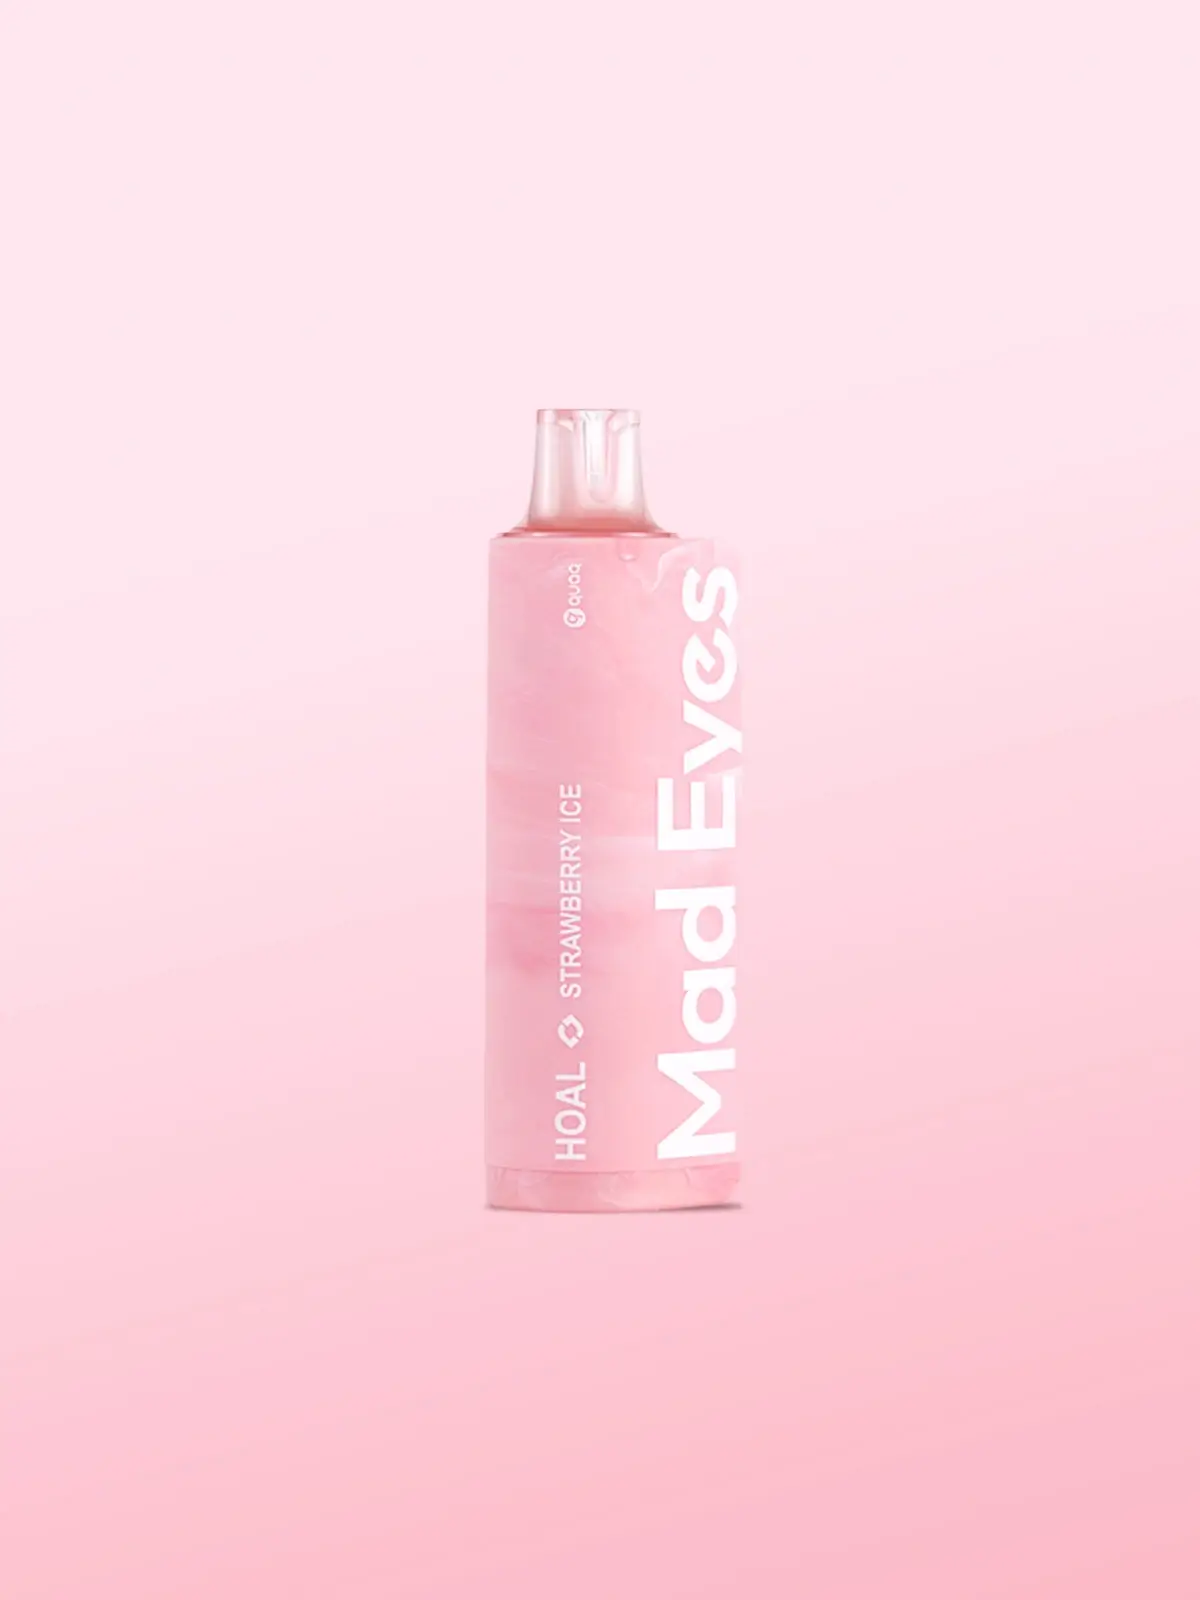 A Mad Eyes HOAL disposable in Strawberry Ice flavour, standing in front of a pink background